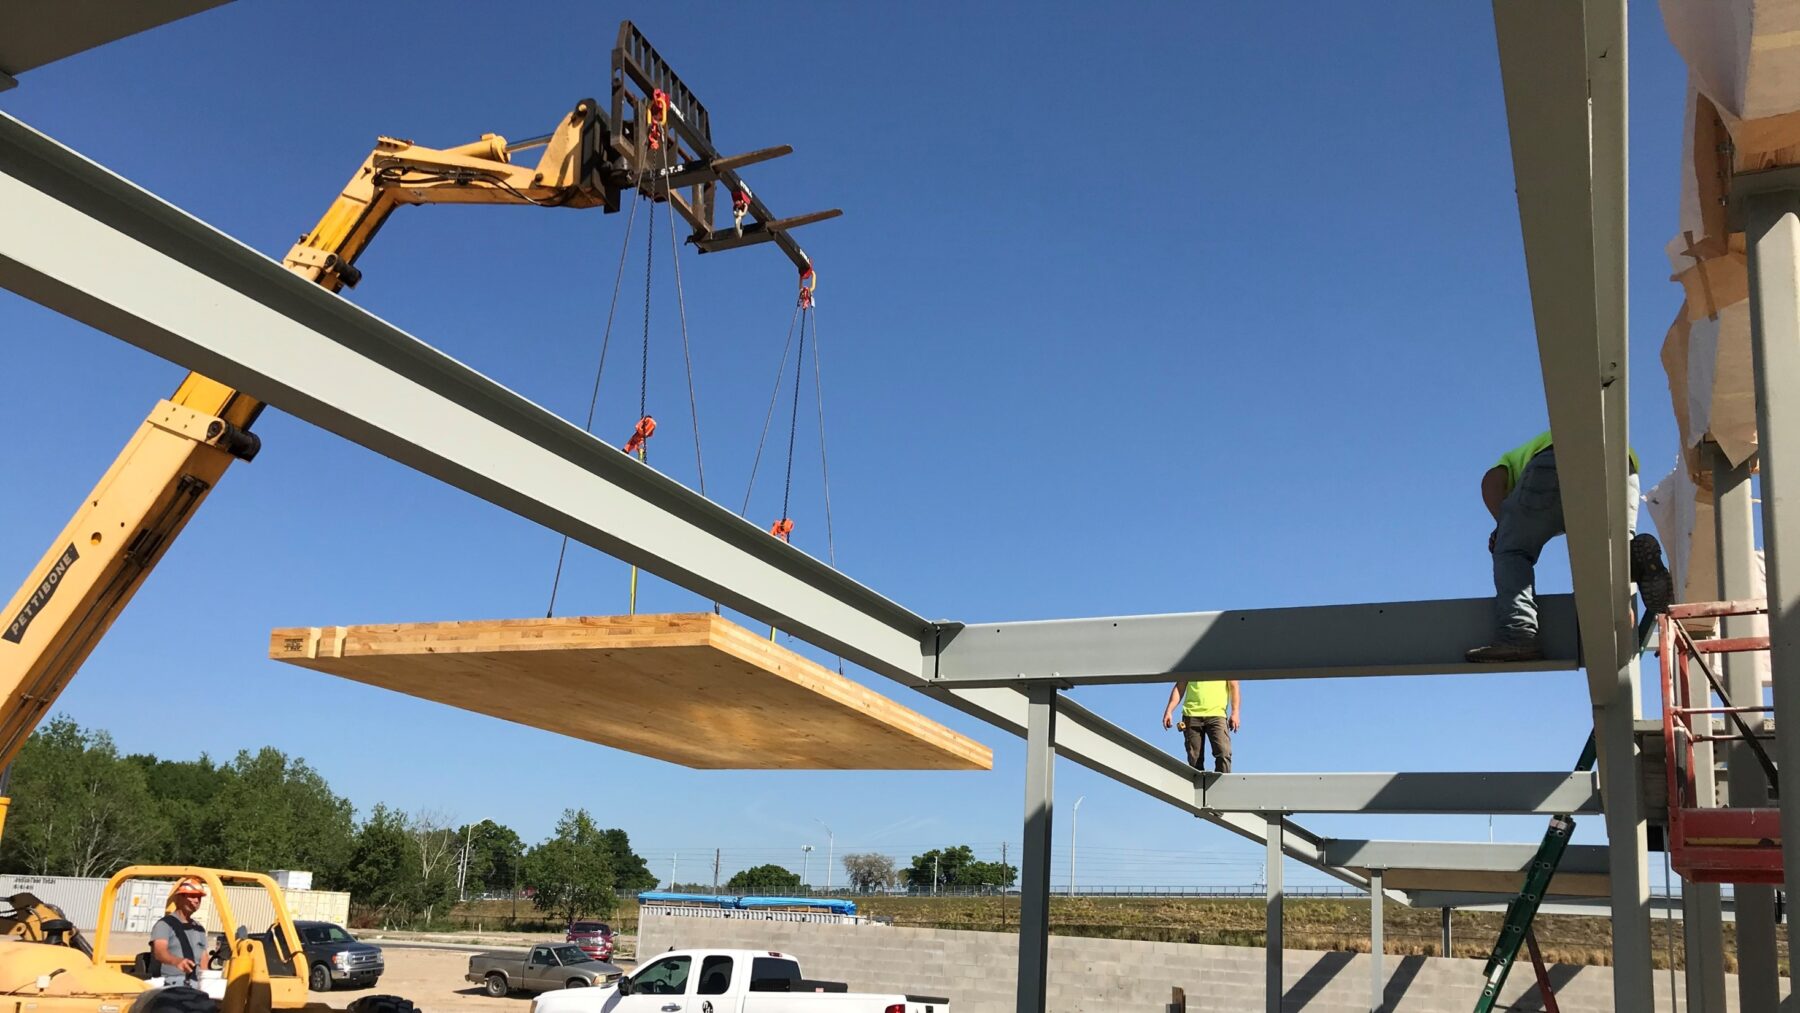 A forklift lifts a CLT panel into place in the wrap-around canopy of the Bonnet Springs Park Event Center during construction